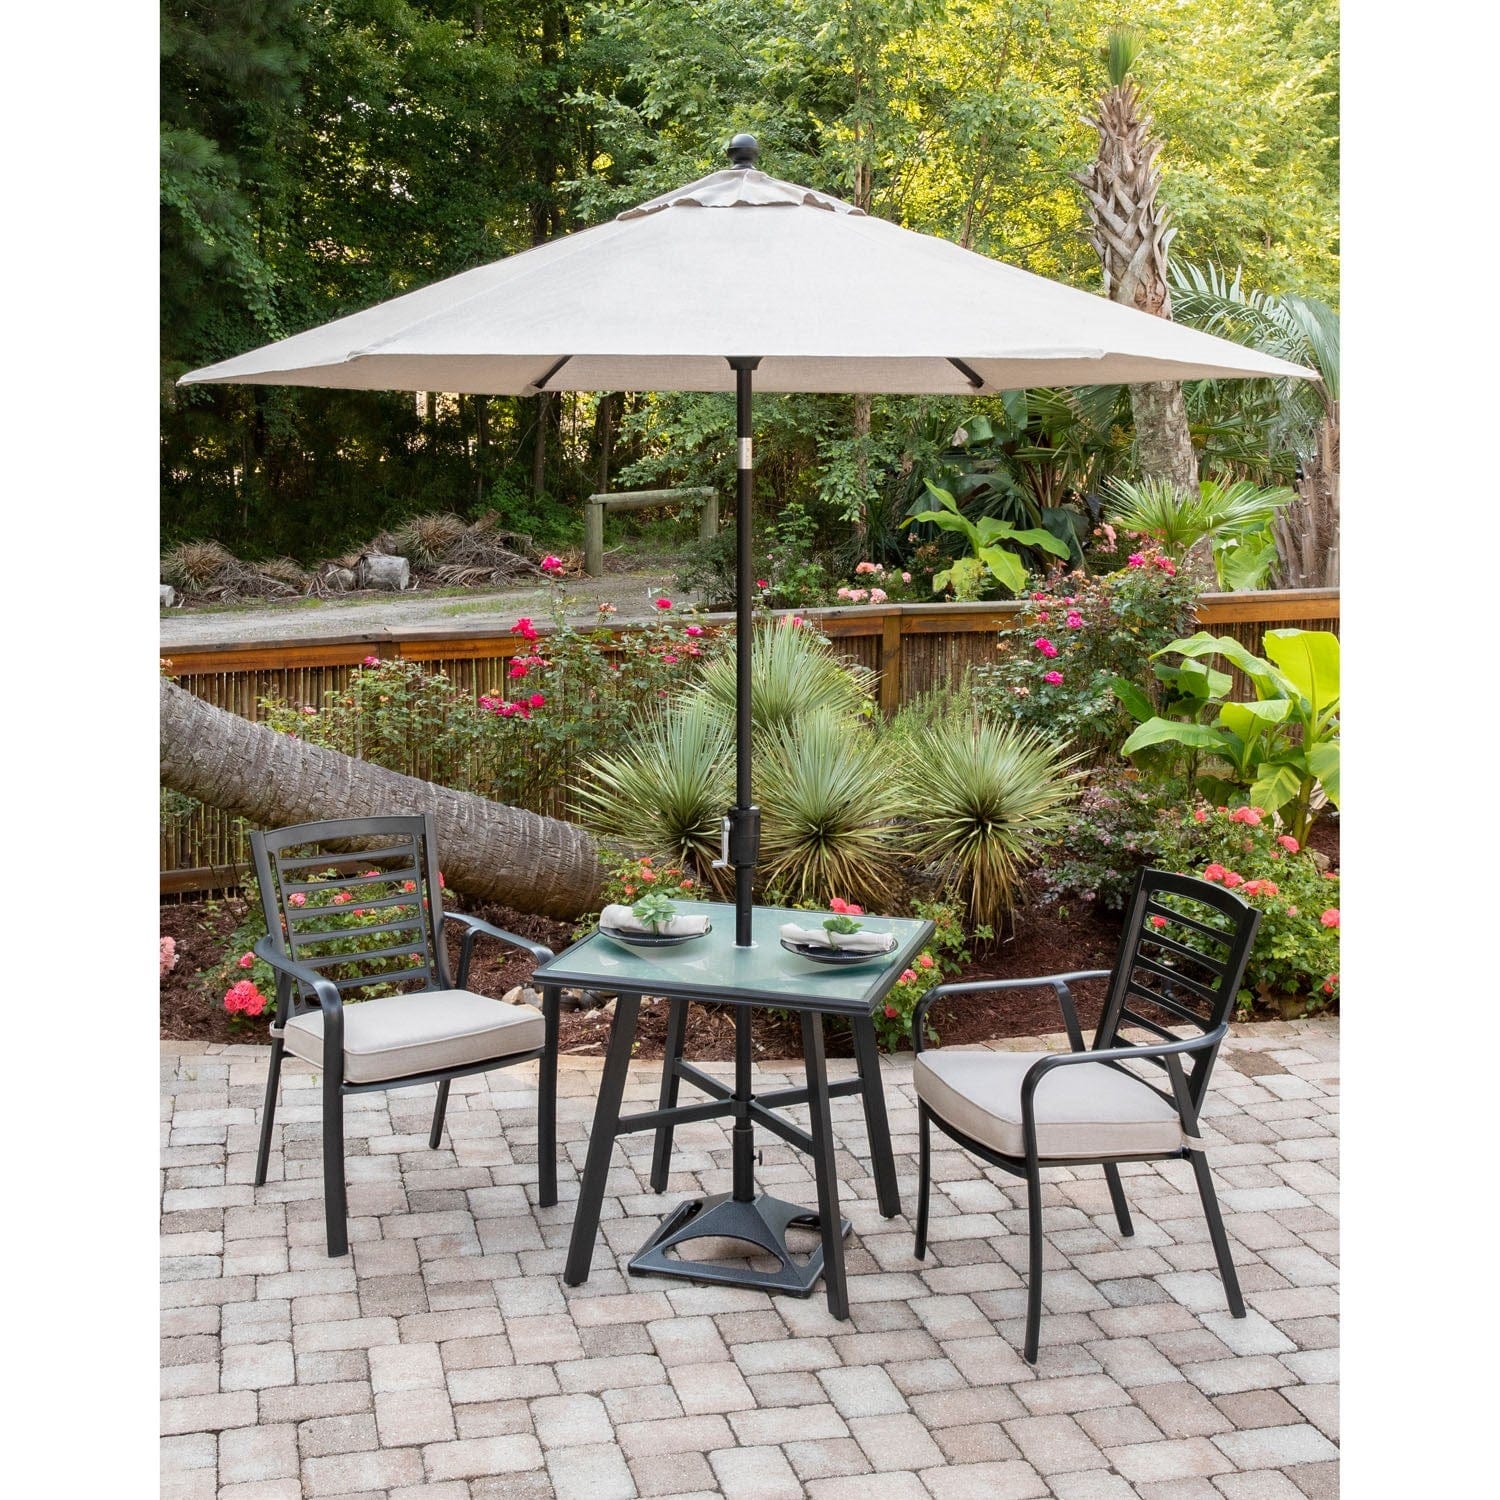 Hanover Bistro Set Hanover - Pemberton 3pc: 2 Alum Dining Chairs w/ Cushion and 1 30" Sq Glass Tbl